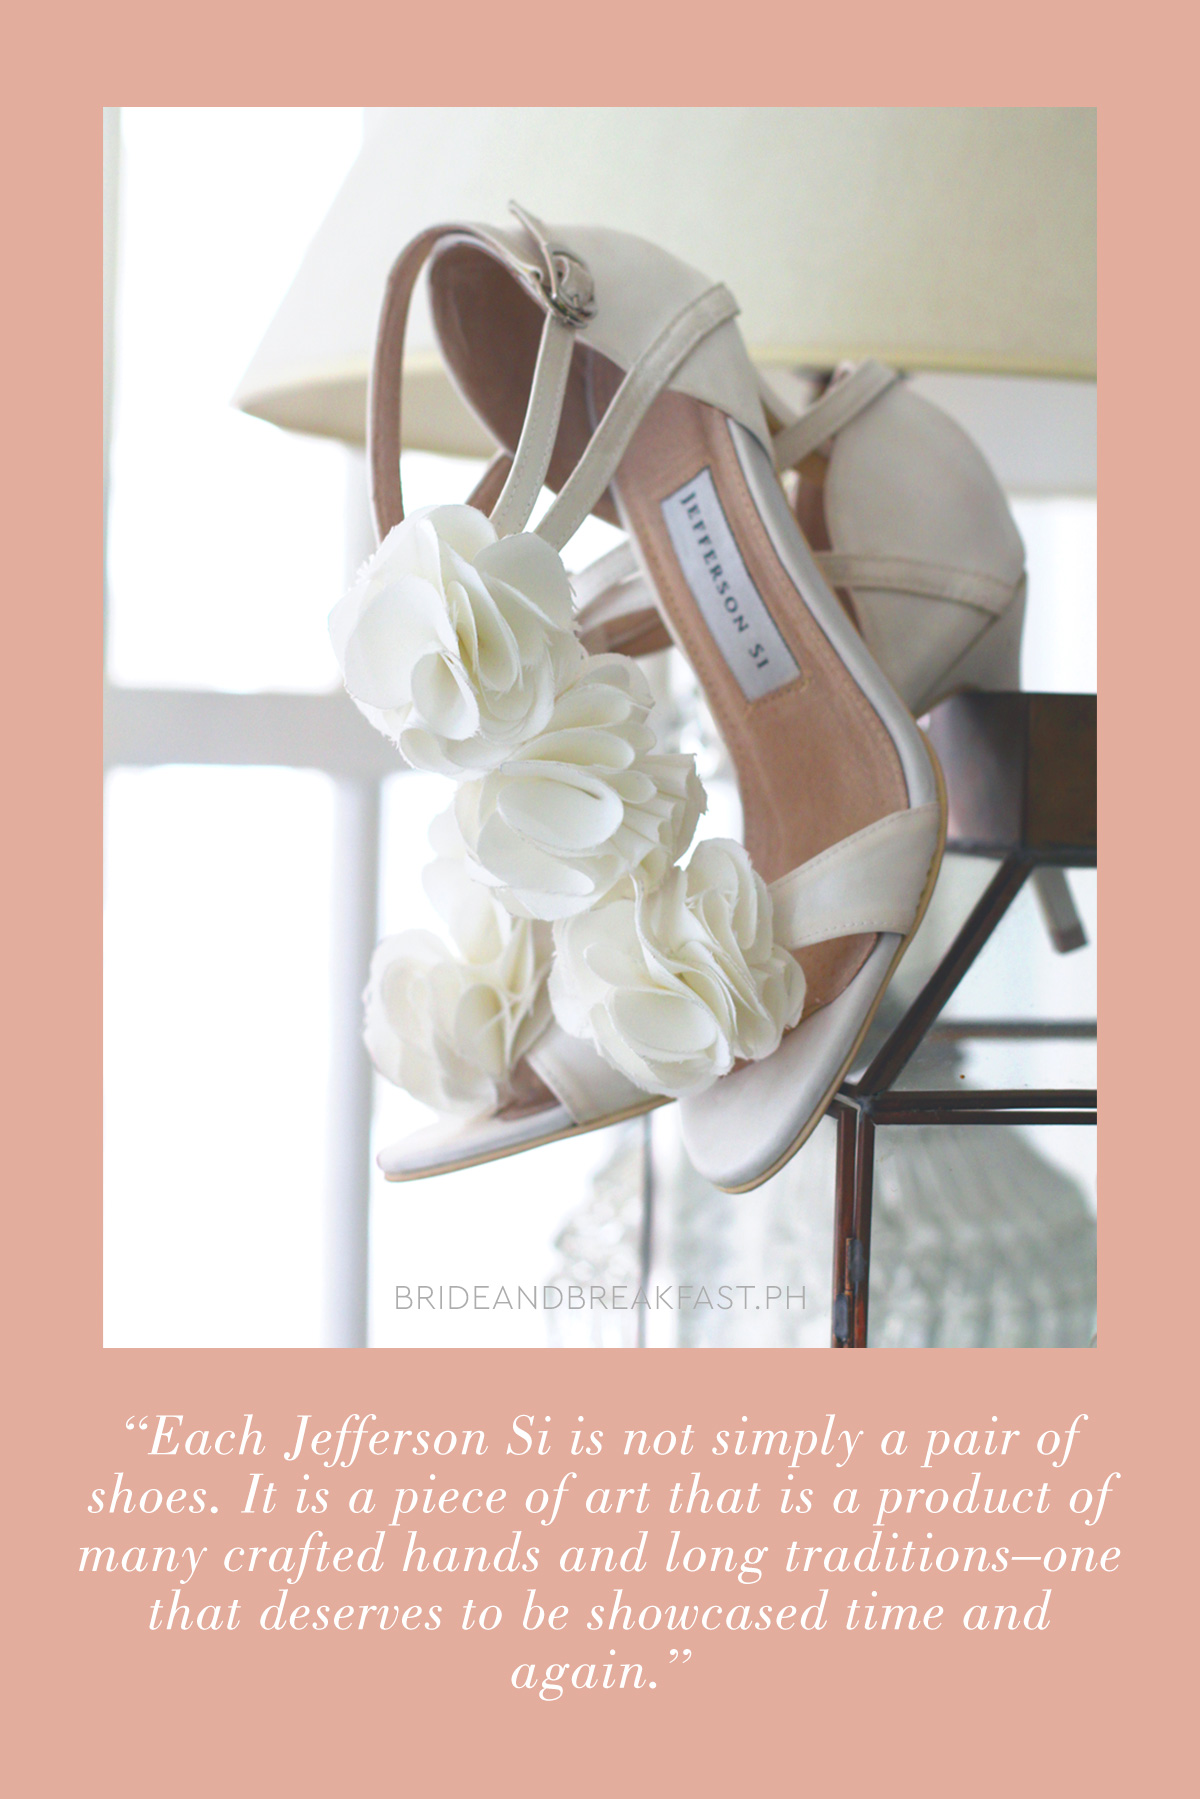 Each Jefferson Si is not simply a pair of shoes. It is a piece of art that is a product of many crafted hands and long traditions--one that deserves to be showcased time and again.